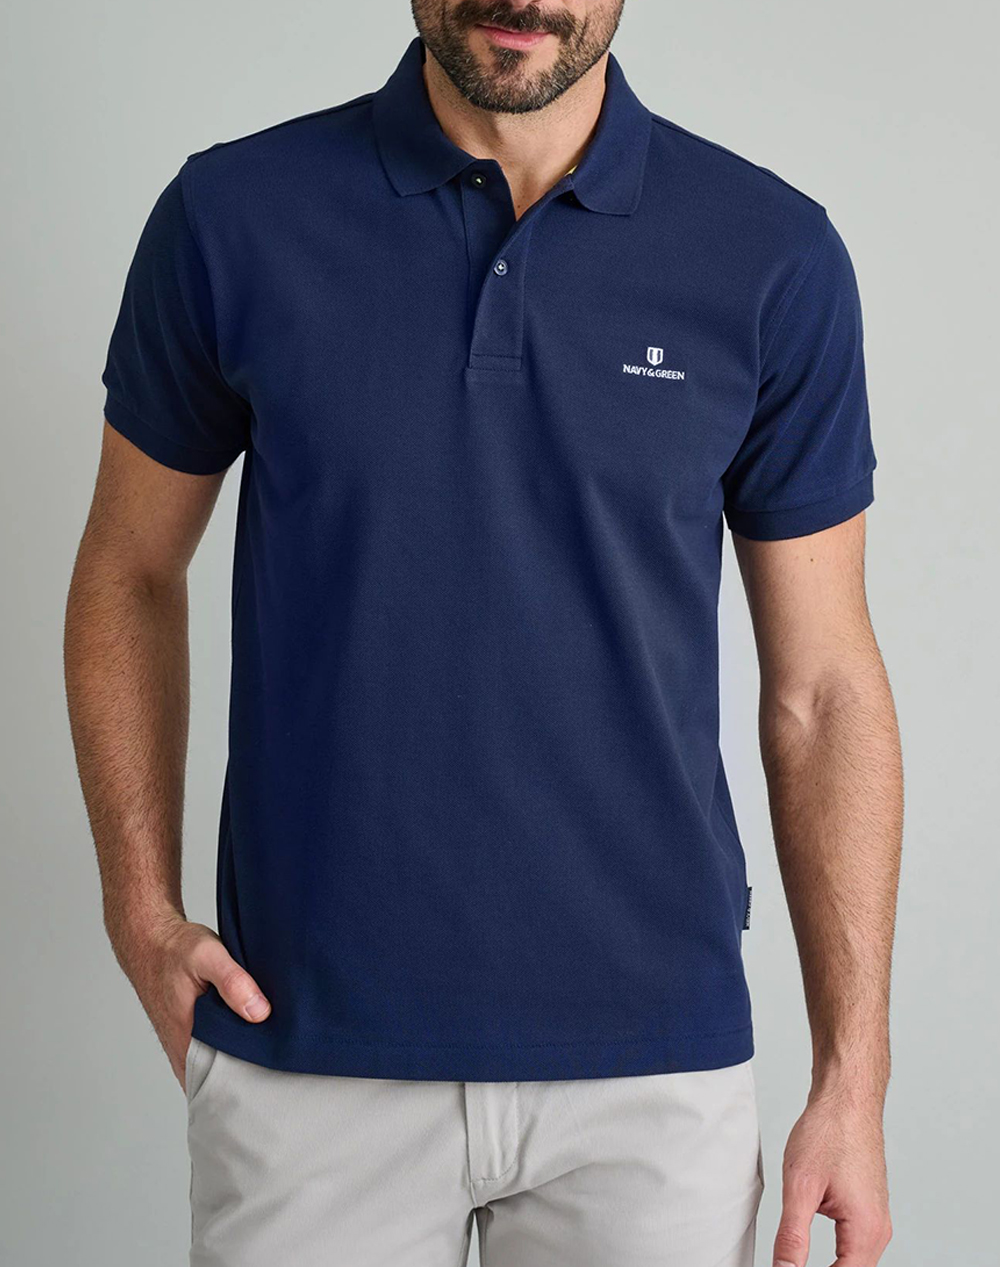 NAVY&GREEN POLO ΜΠΛΟΥΖΑΚΙ-CUSTOM FIT 24GE.300.7-MD BLUE NavyBlue